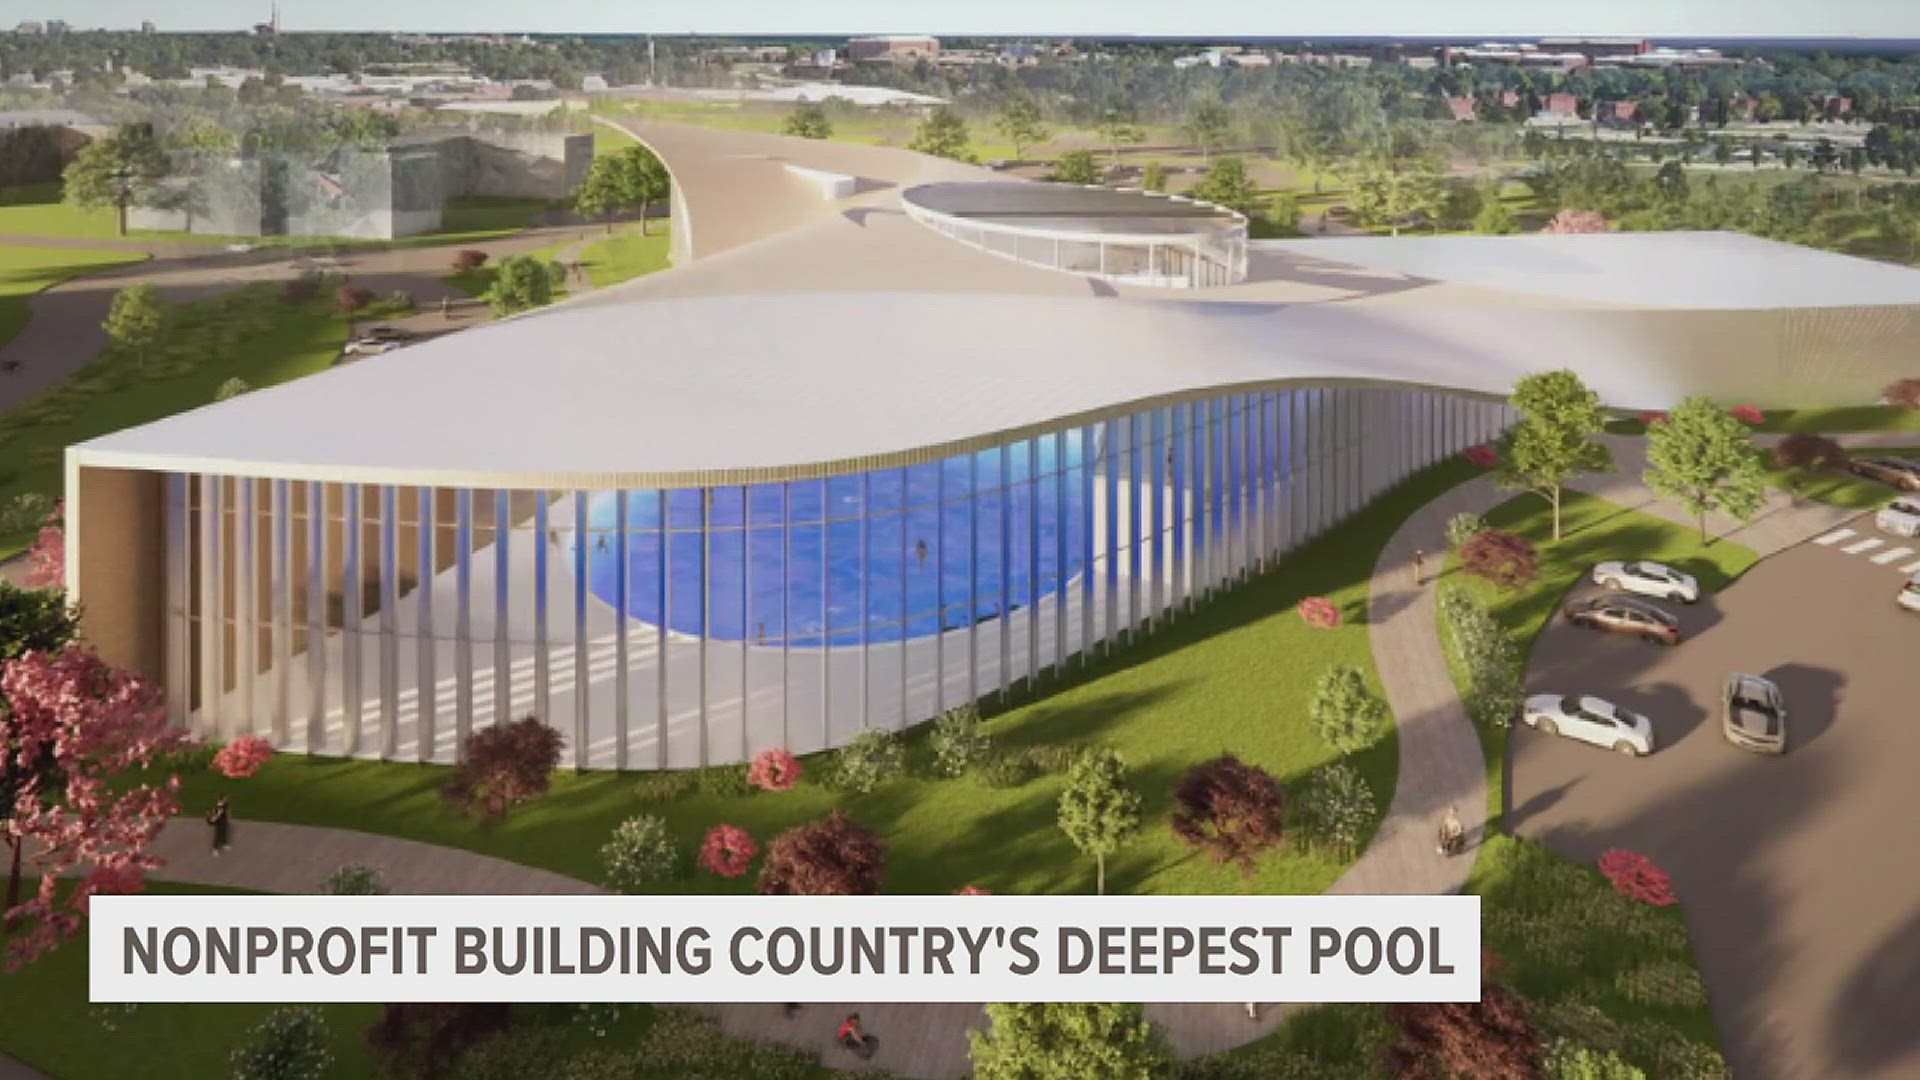 The nonprofit Diveheart is planning a 130 feet diving pool for those living with disabilities and veterans with PTSD.